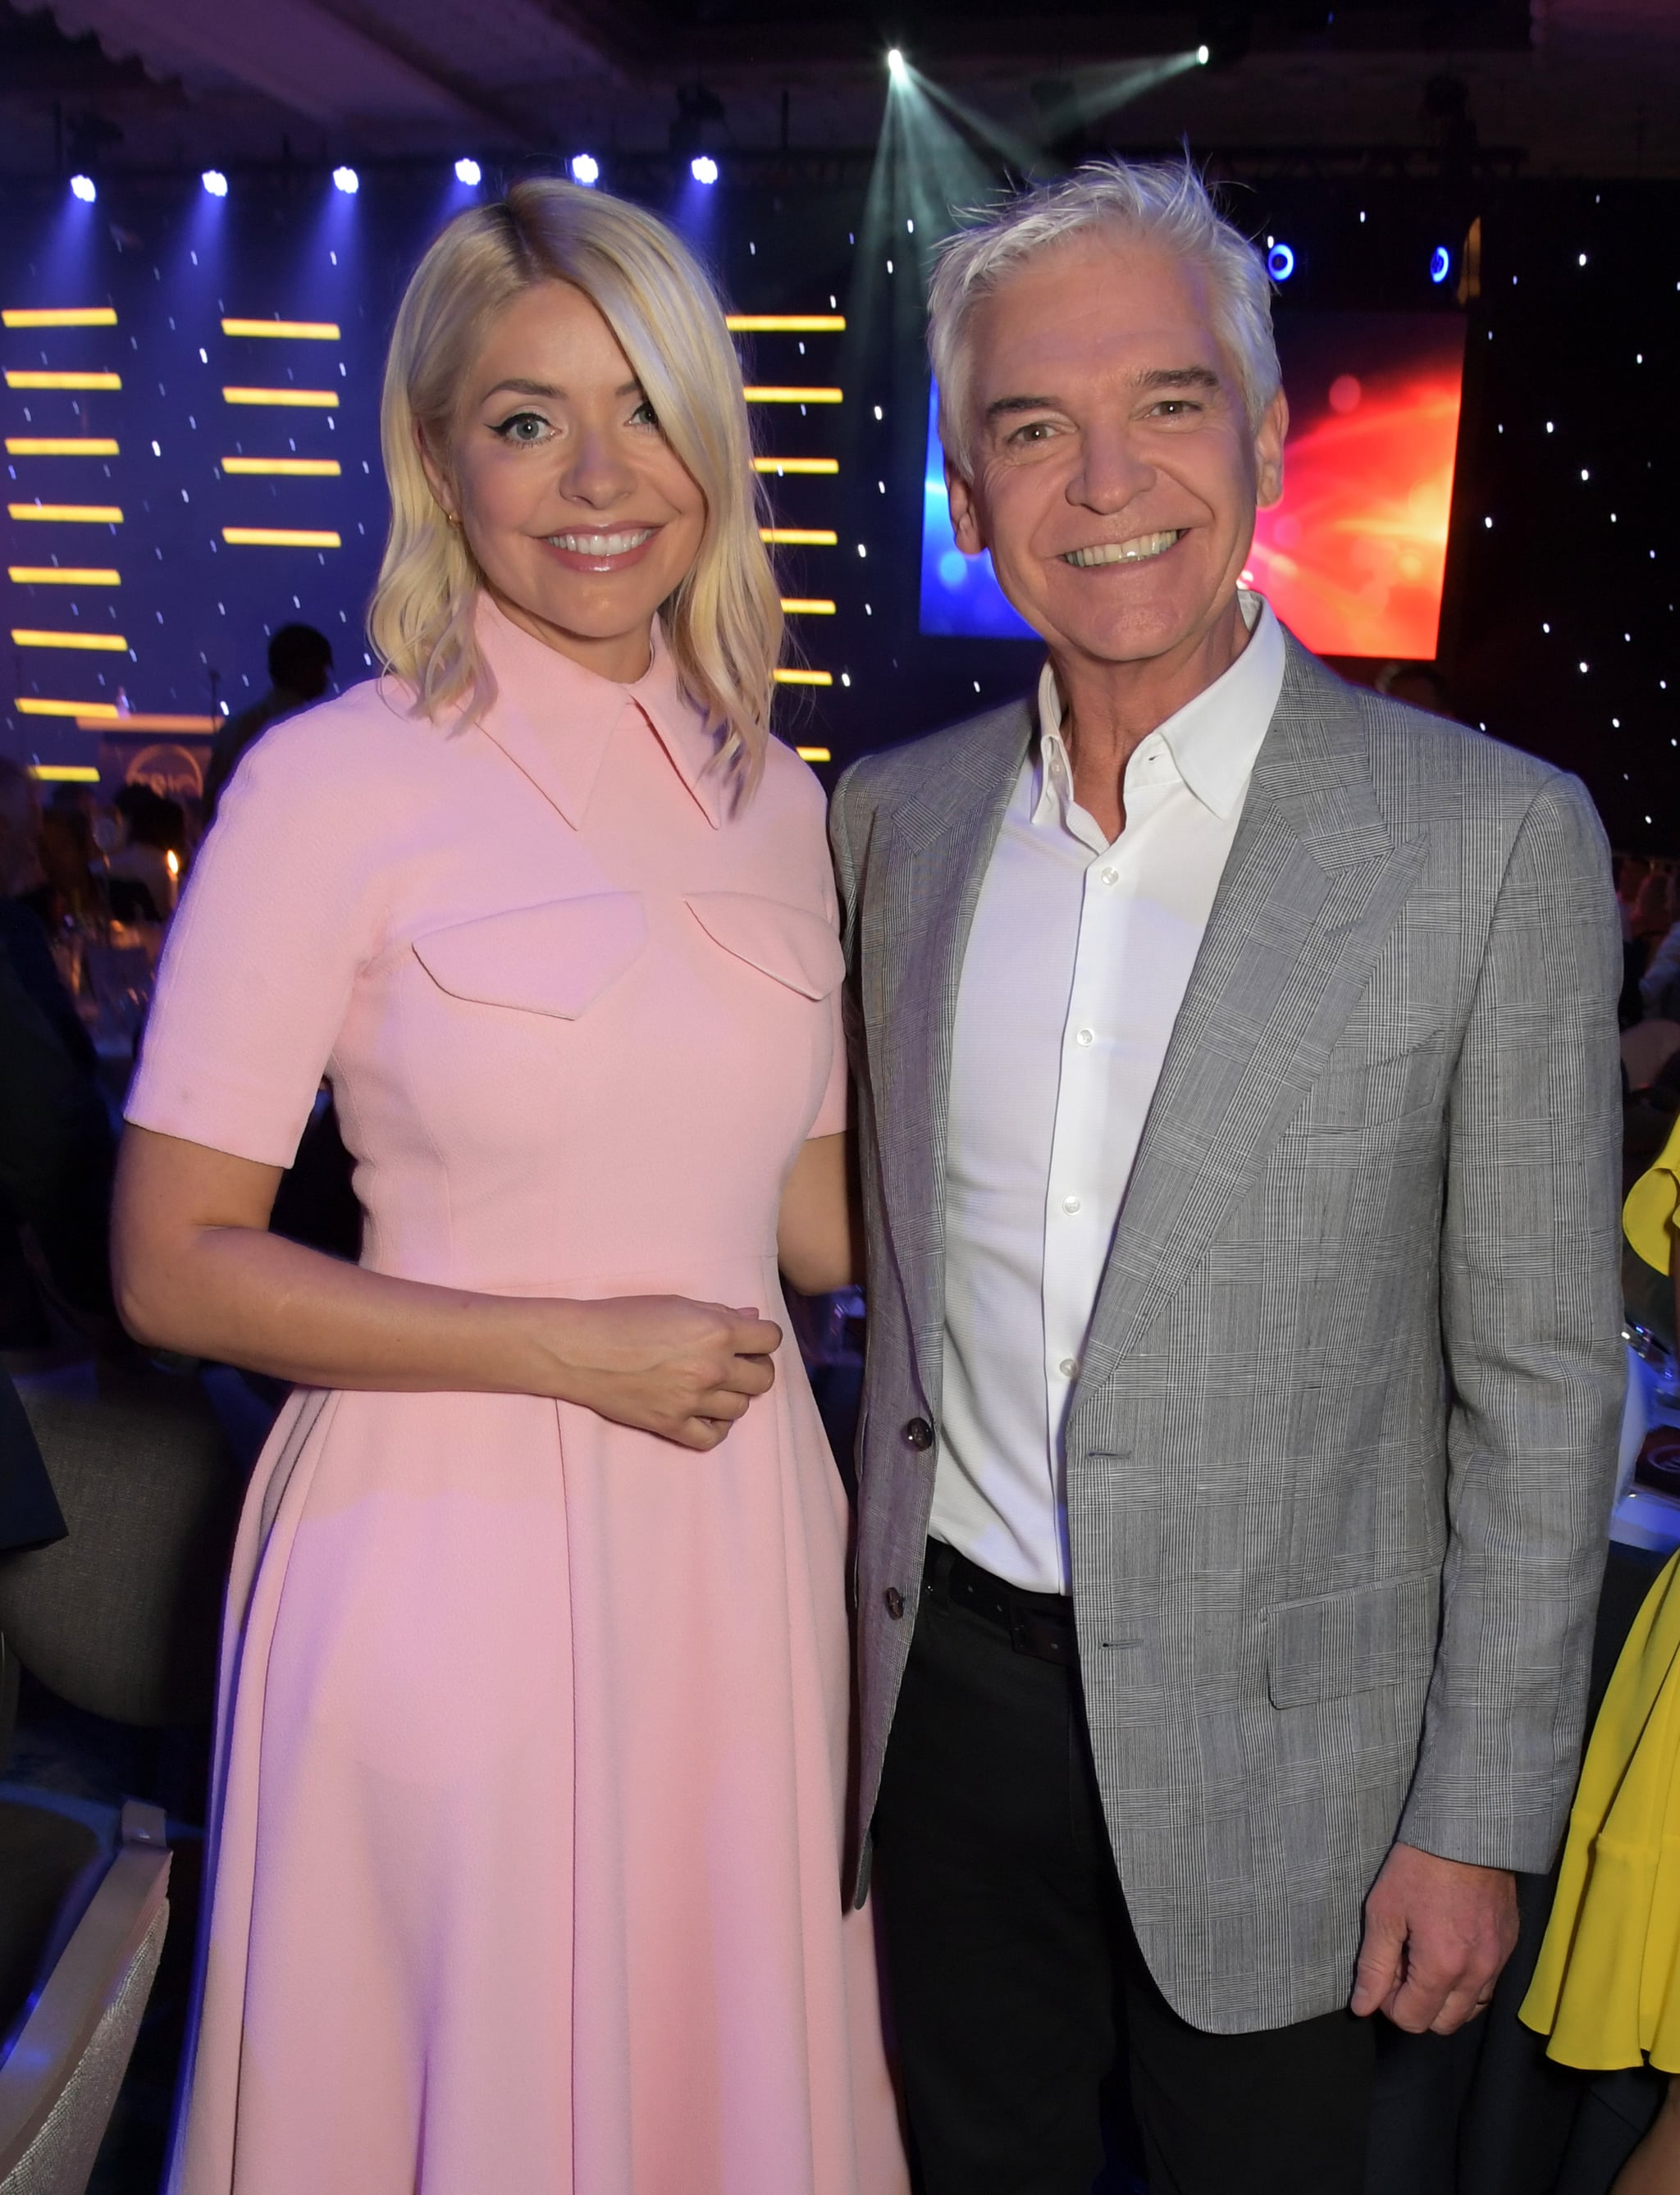 LONDON, ENGLAND - JULY 06: Holly Willoughby (L) and Phillip Schofield attend The TRIC Awards 2022 at The Grosvenor House Hotel on July 06, 2022 in London, England. (Photo by David M. Benett/Dave Benett/Getty Images)